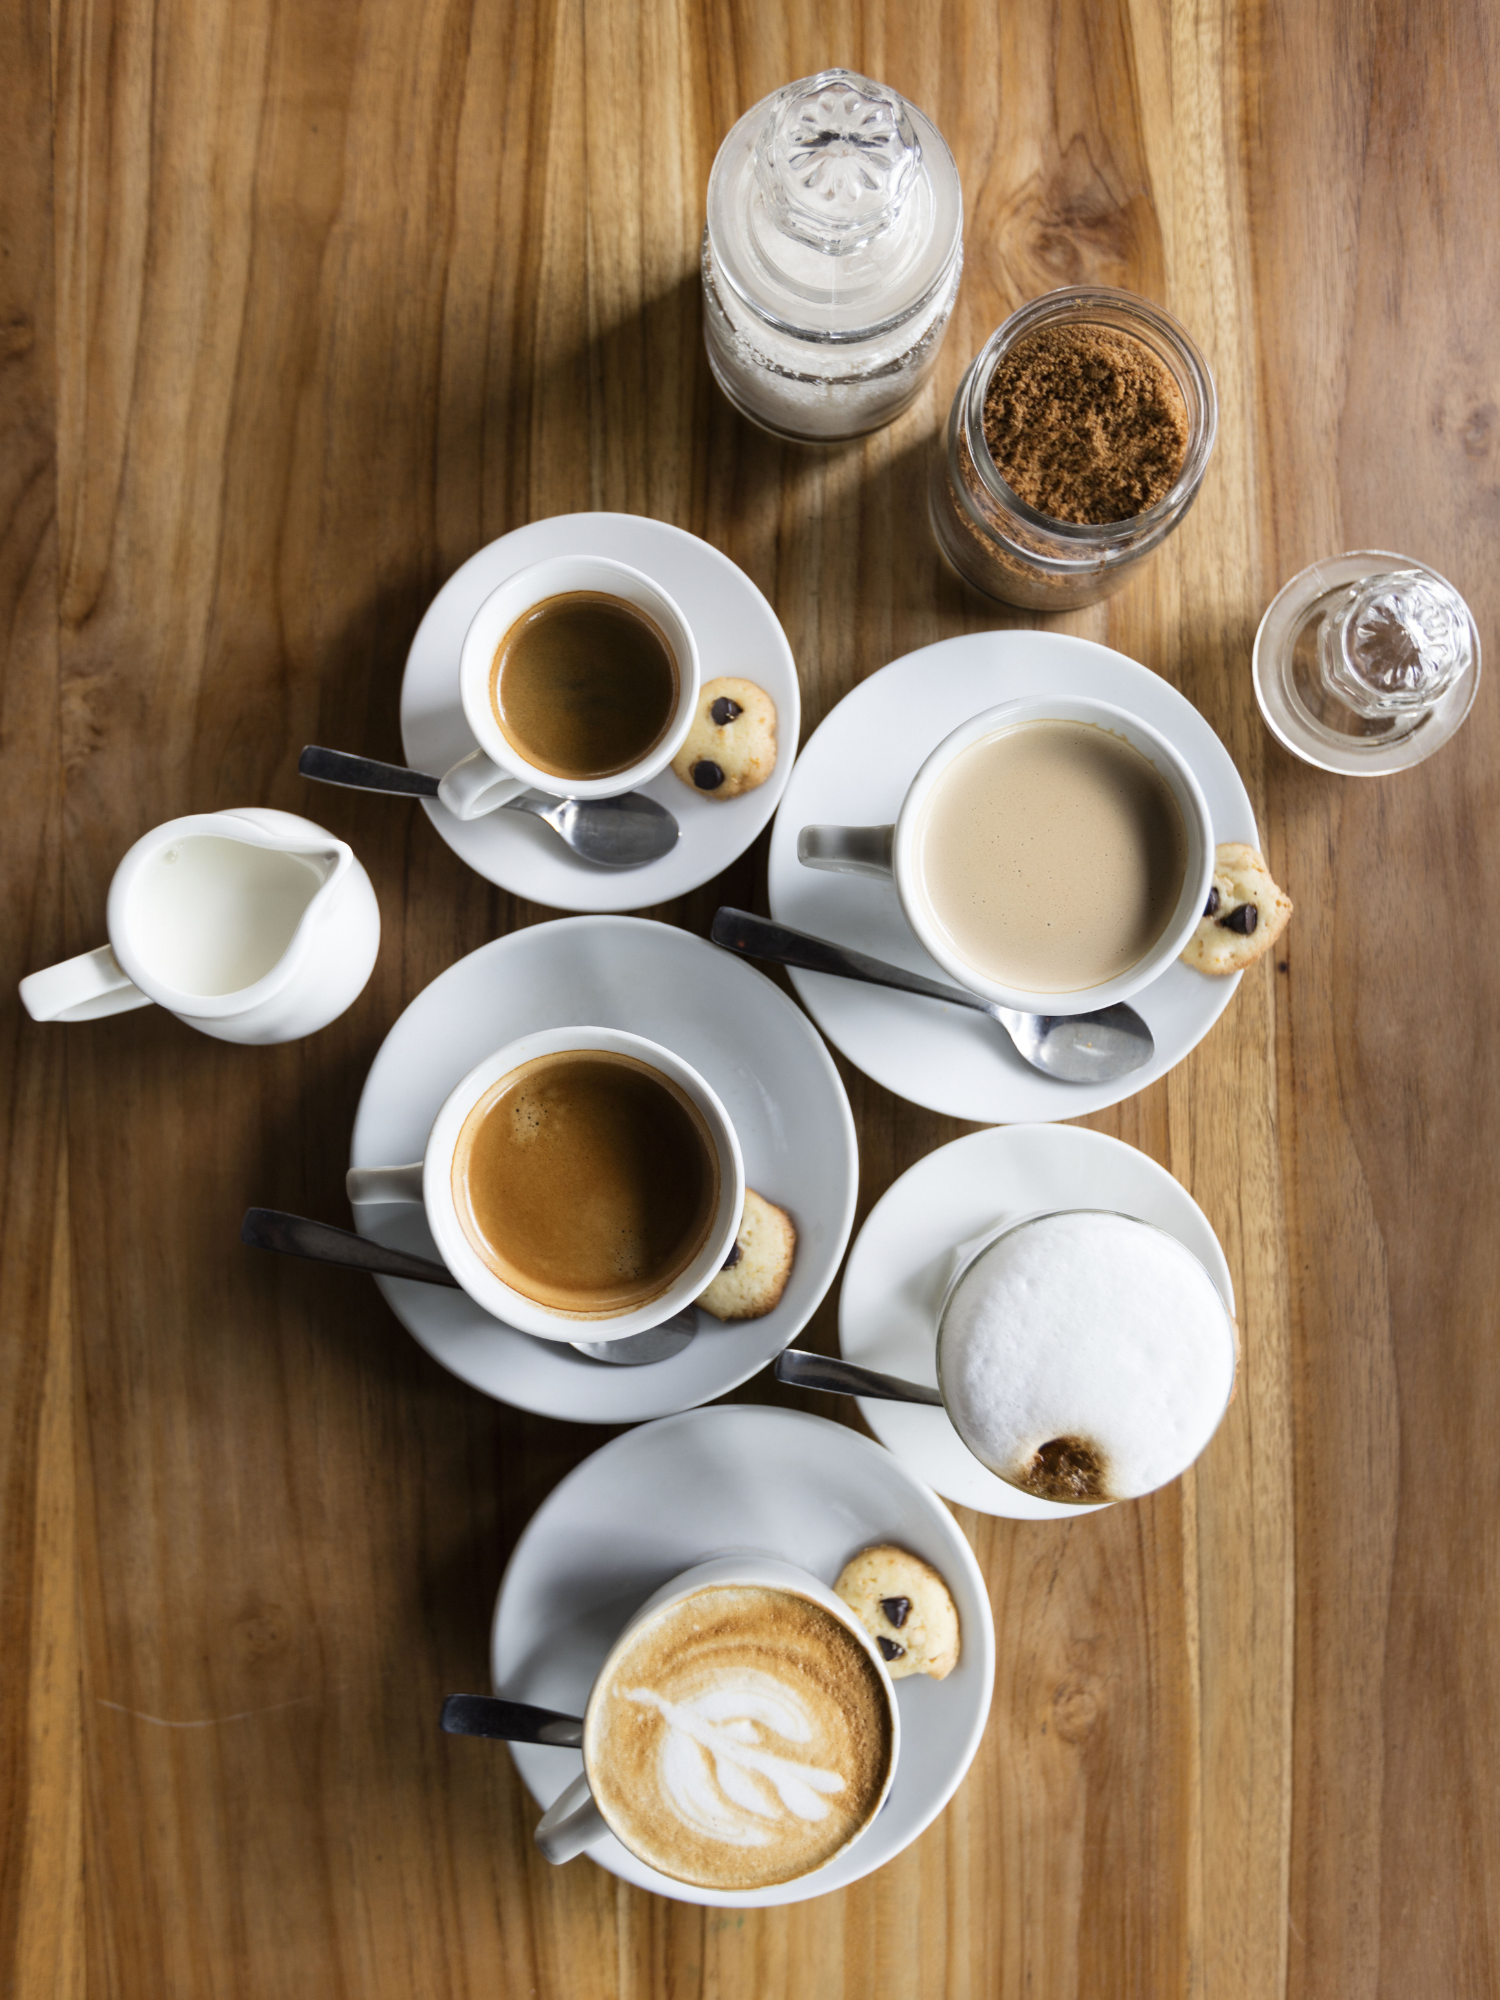 many cups of coffee on saucers sitting on a wooden table